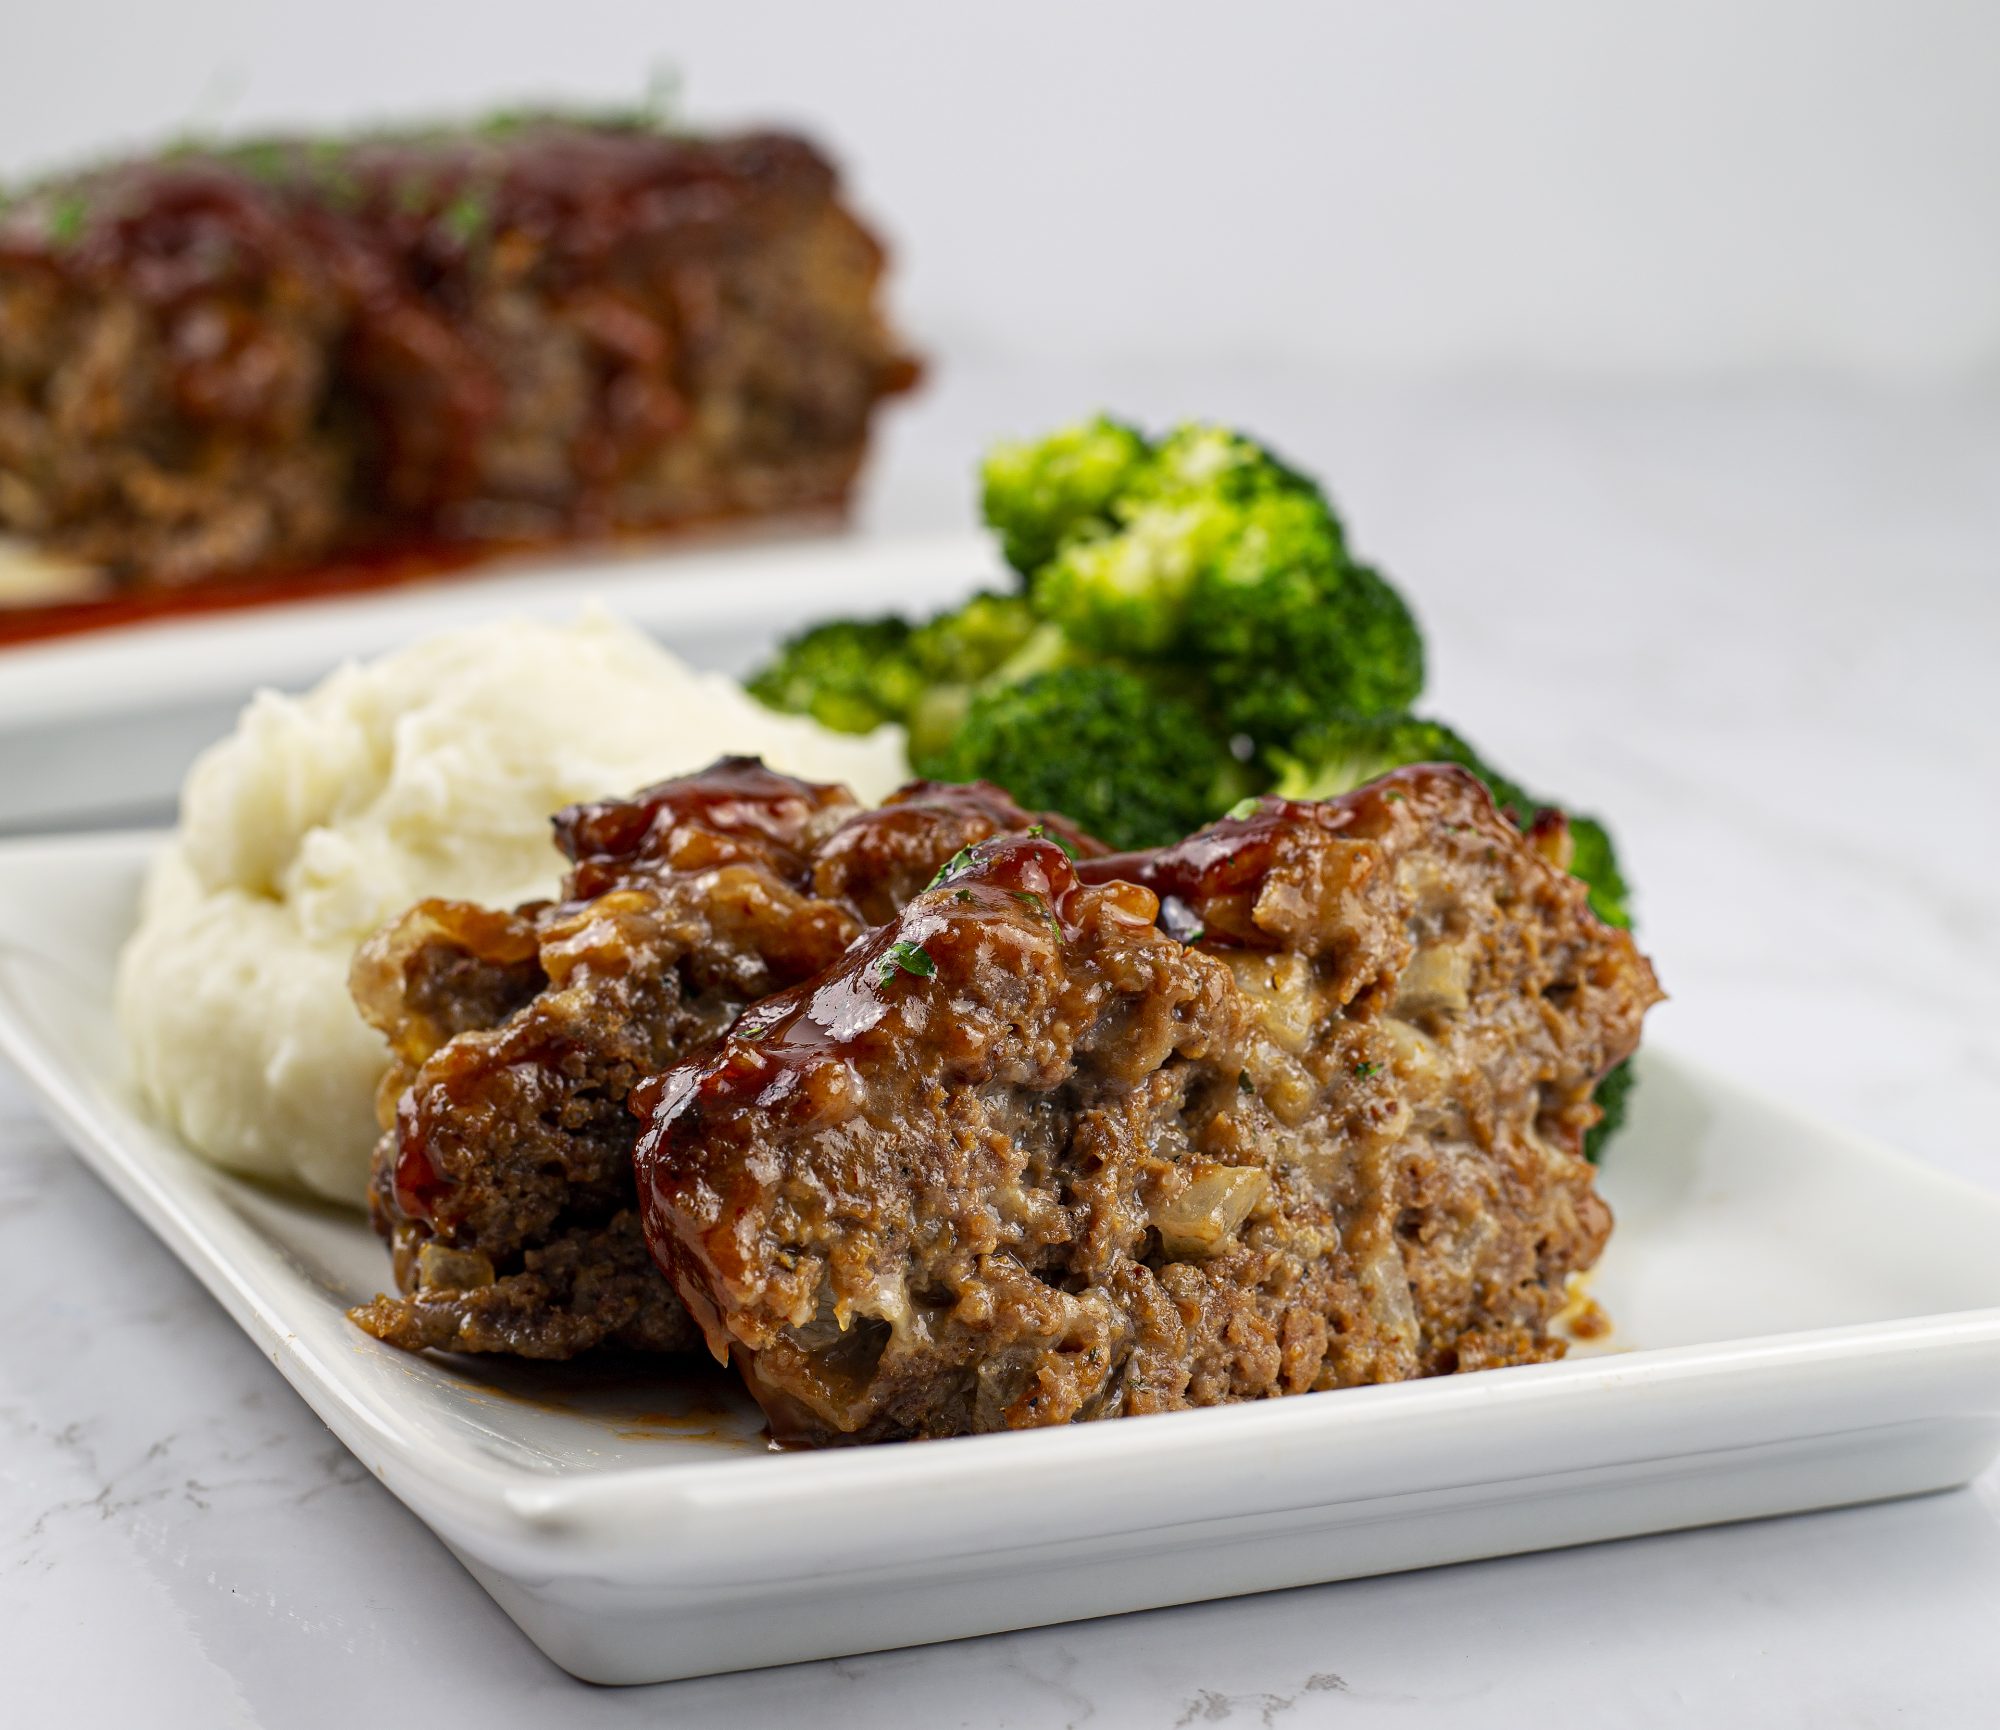 Meatloaf on a plate with broccoli and mashed potatoes